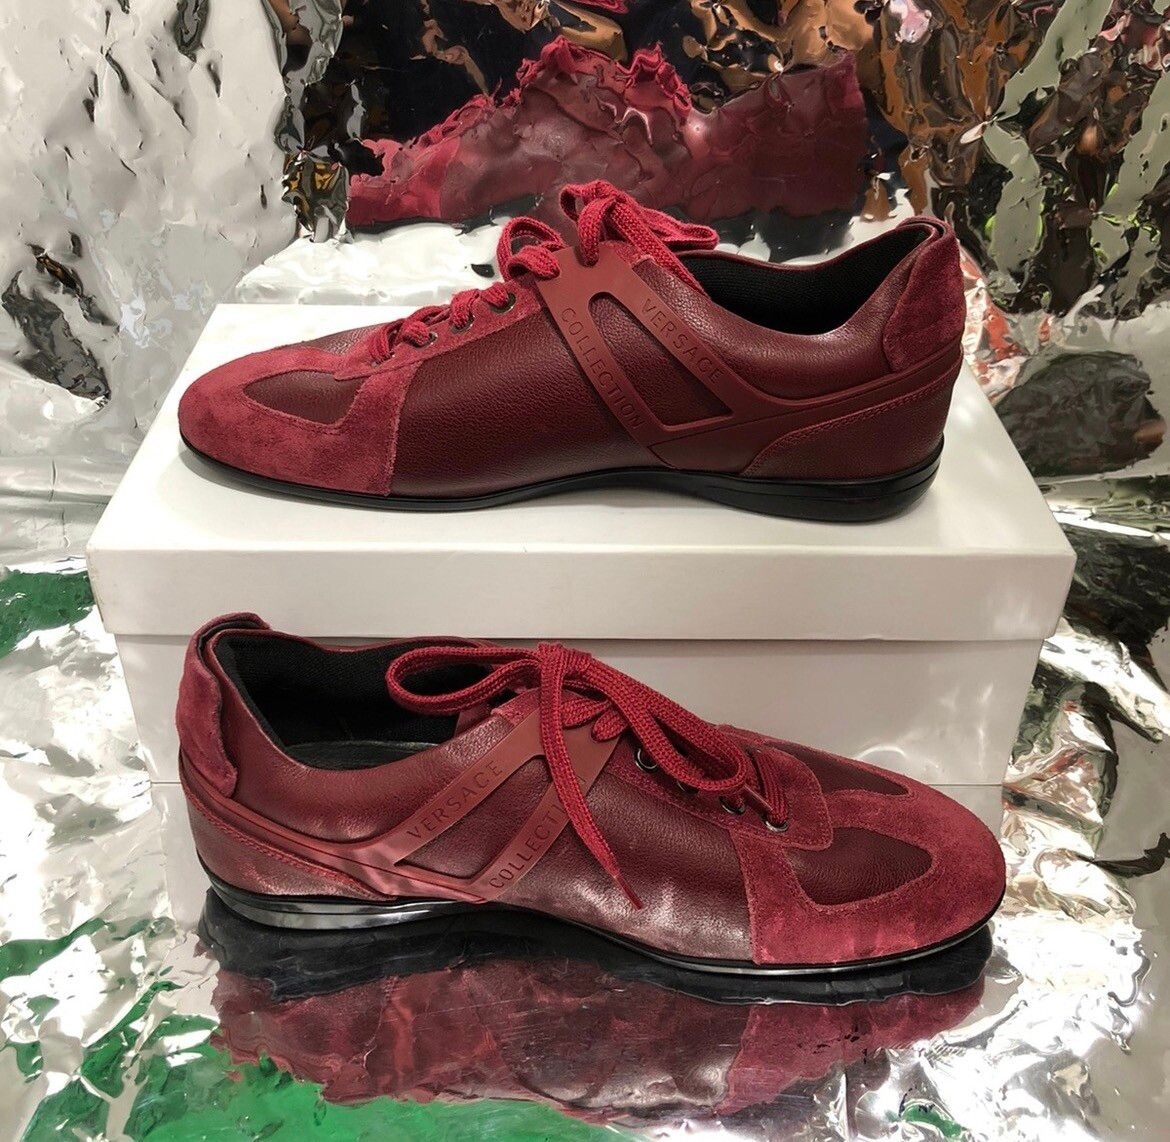 Versace Versace Burgundy Leather & Suede Shoes Size US 10 / EU 43 - 2 Preview